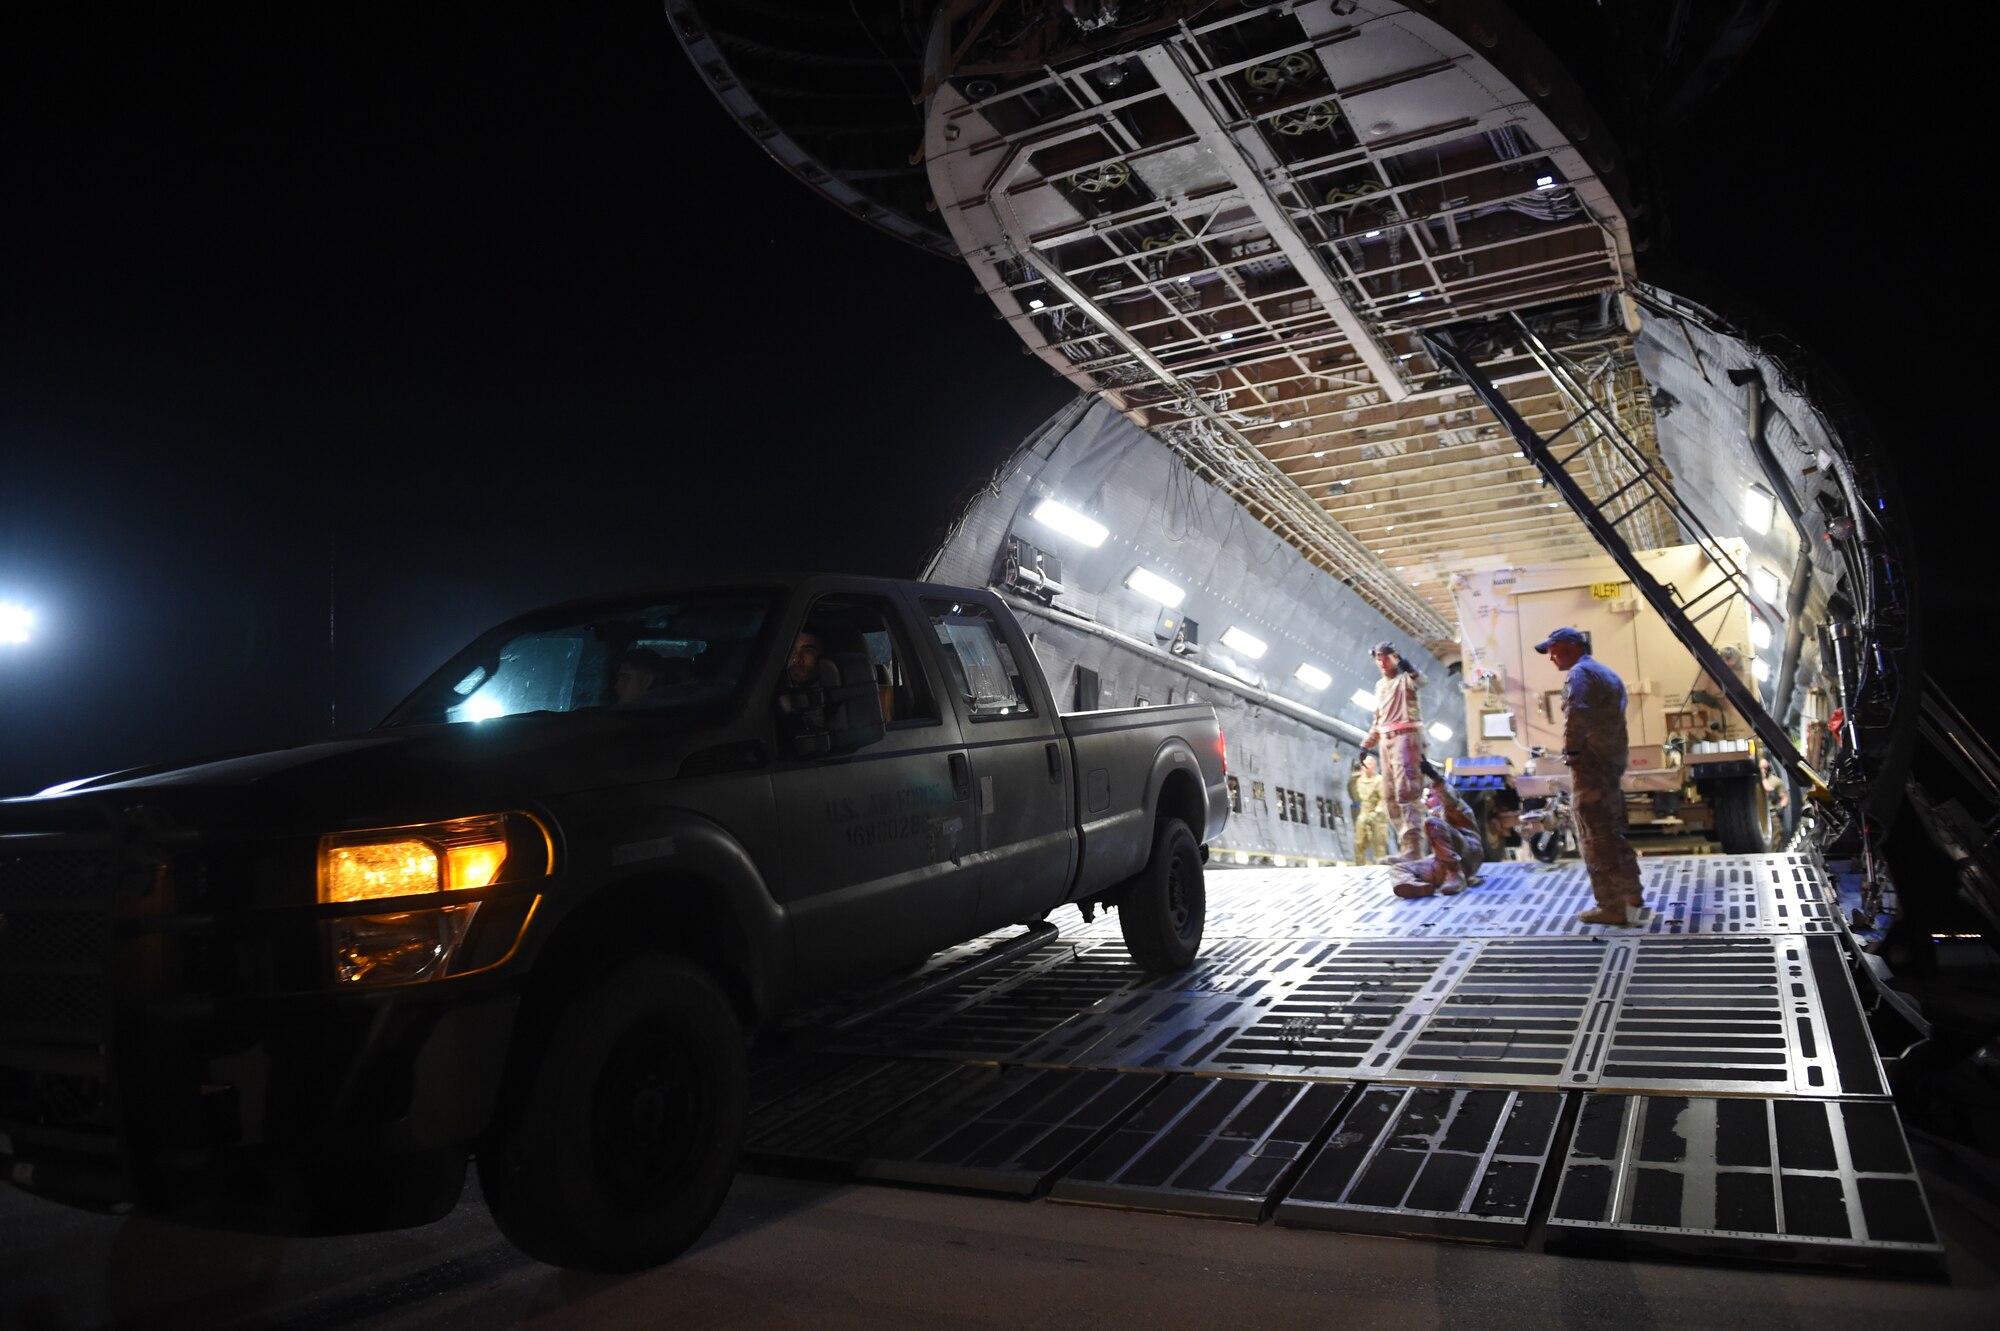 Airmen from the 621st Contingency Response Group help offload equipment from a C-5M Super Galaxy at Prince Sultan Air Base, Kingdom of Saudi Arabia, June 26, 2019. The 621st CRG deployed for an air base opening mission in response to the White House authorization of approximately 1,000 additional troops in U.S. Central Command's area of responsibility for defensive purposes to address air, naval, and ground-based threats in the Middle East. (U.S. Air Force photo by Staff Sgt. Sarah Brice)